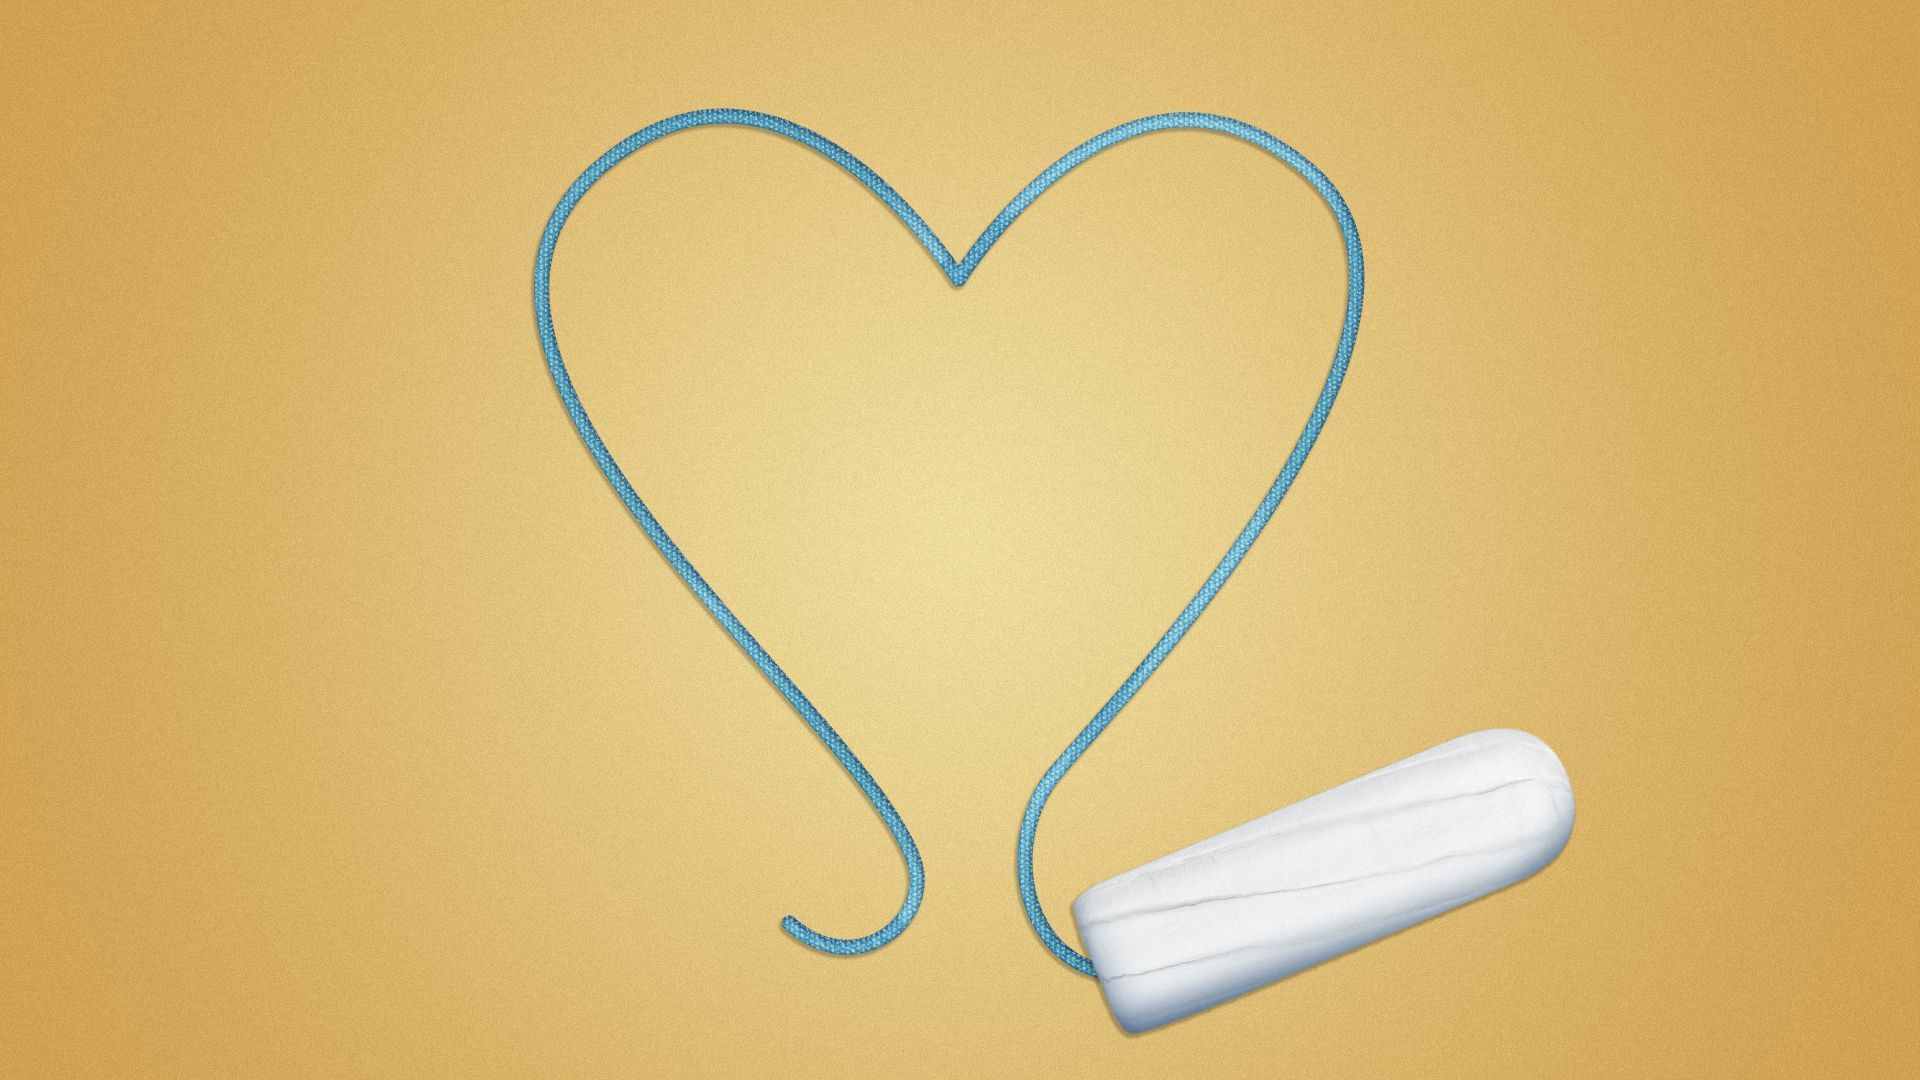 Illustration of a tampon with the string forming a heart shape. 